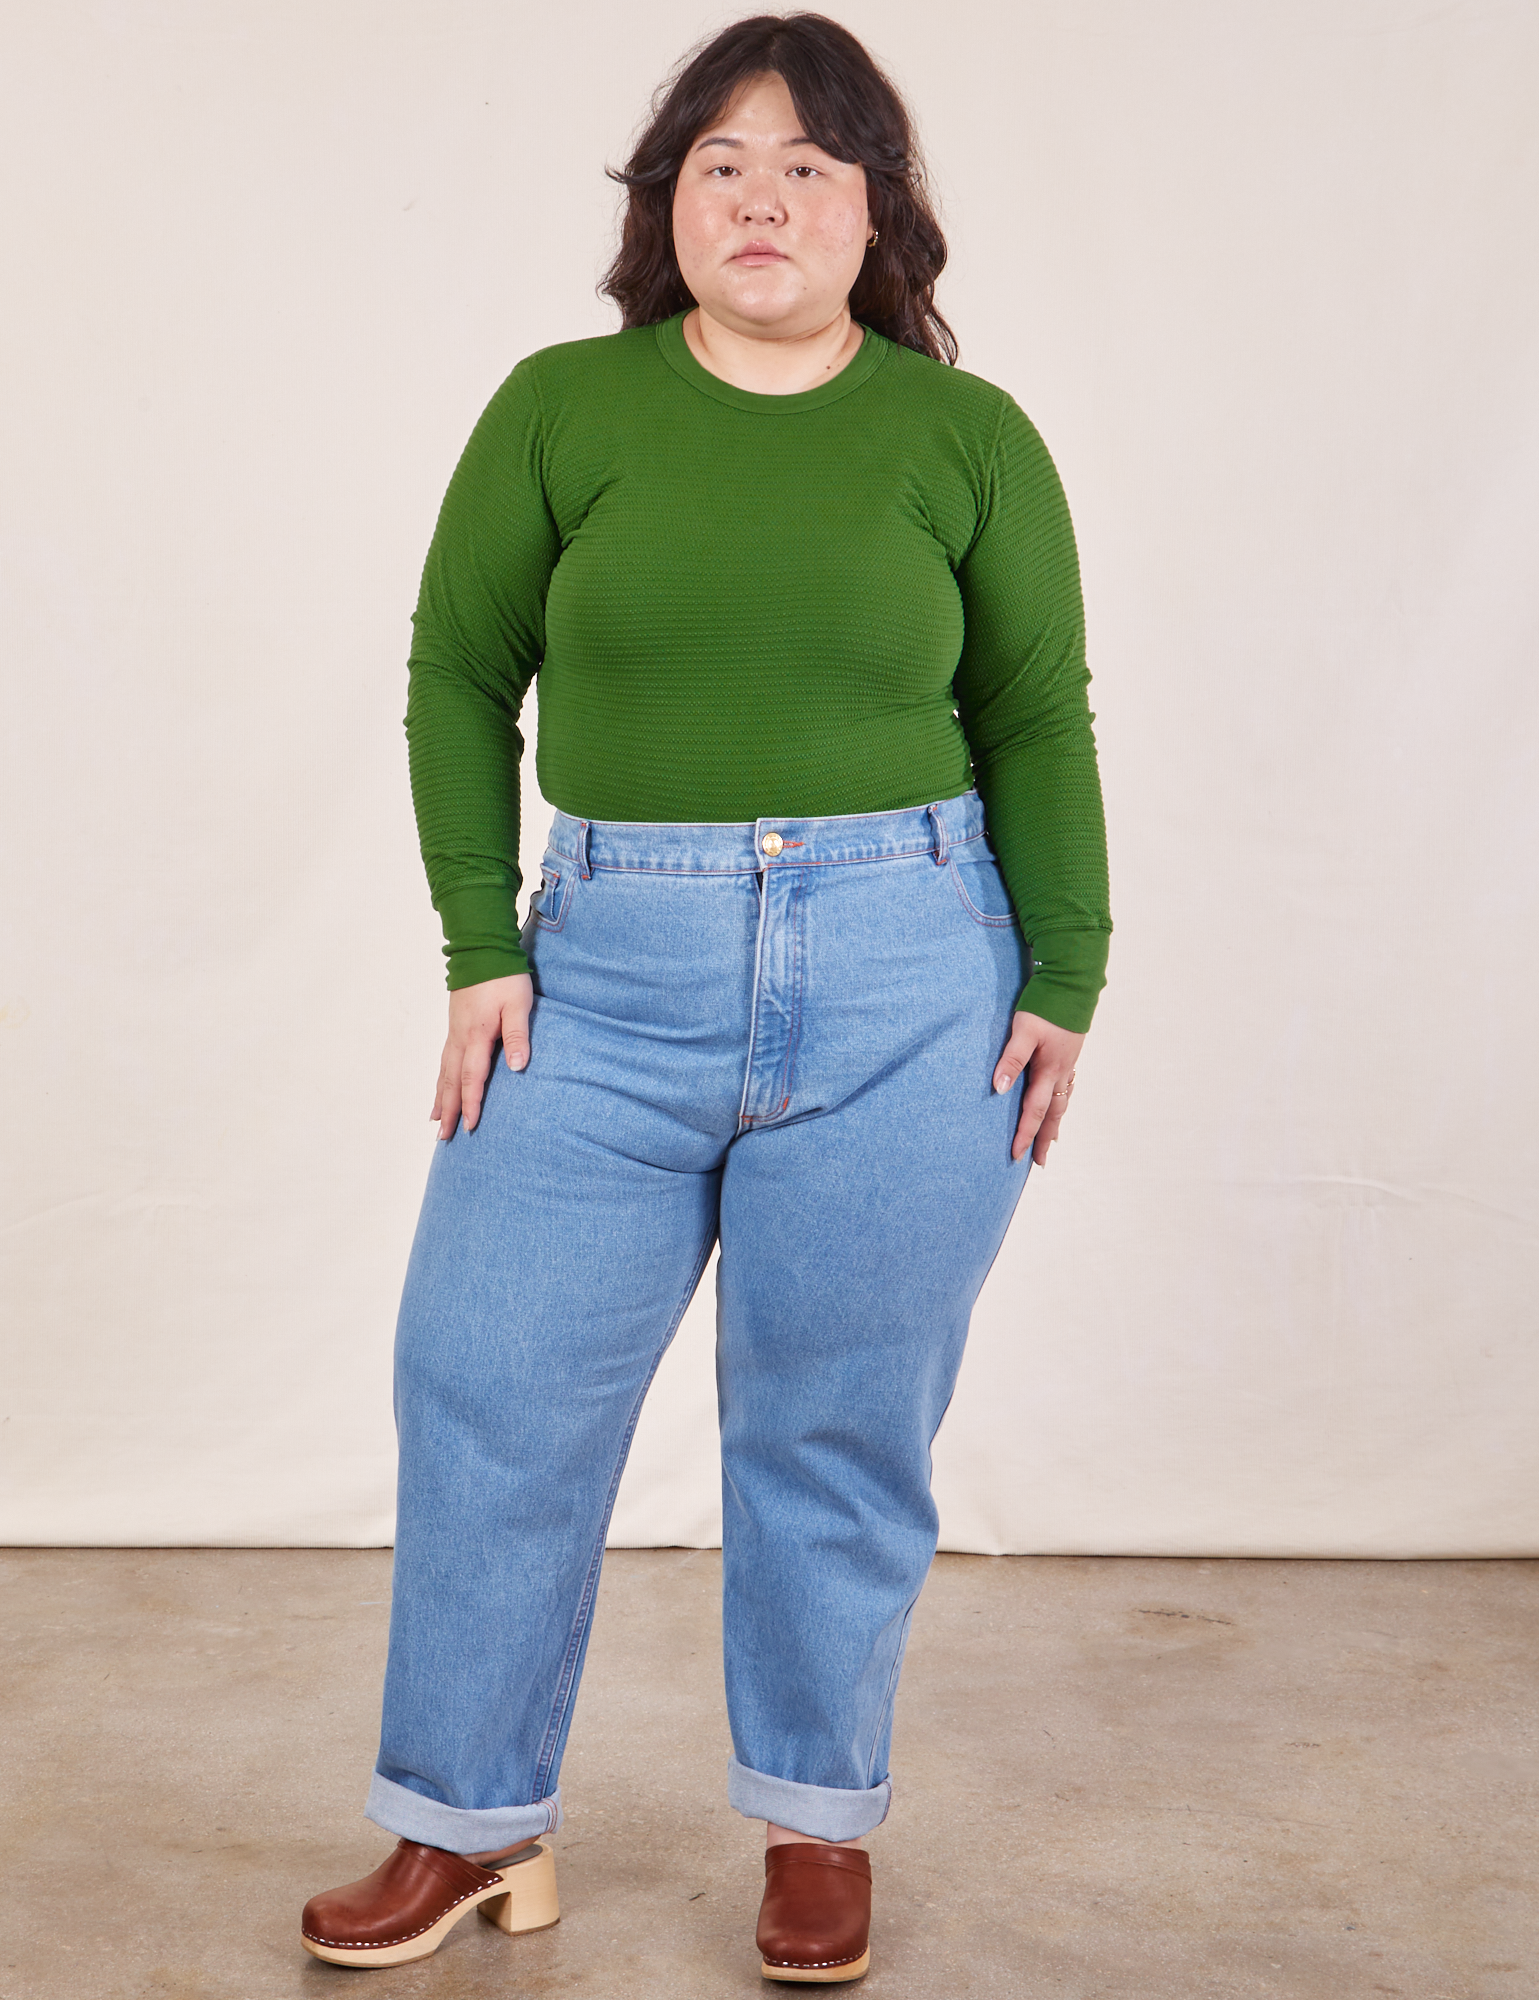 Ashley is wearing Honeycomb Thermal in Lawn Green tucked into light wash Frontier Jeans